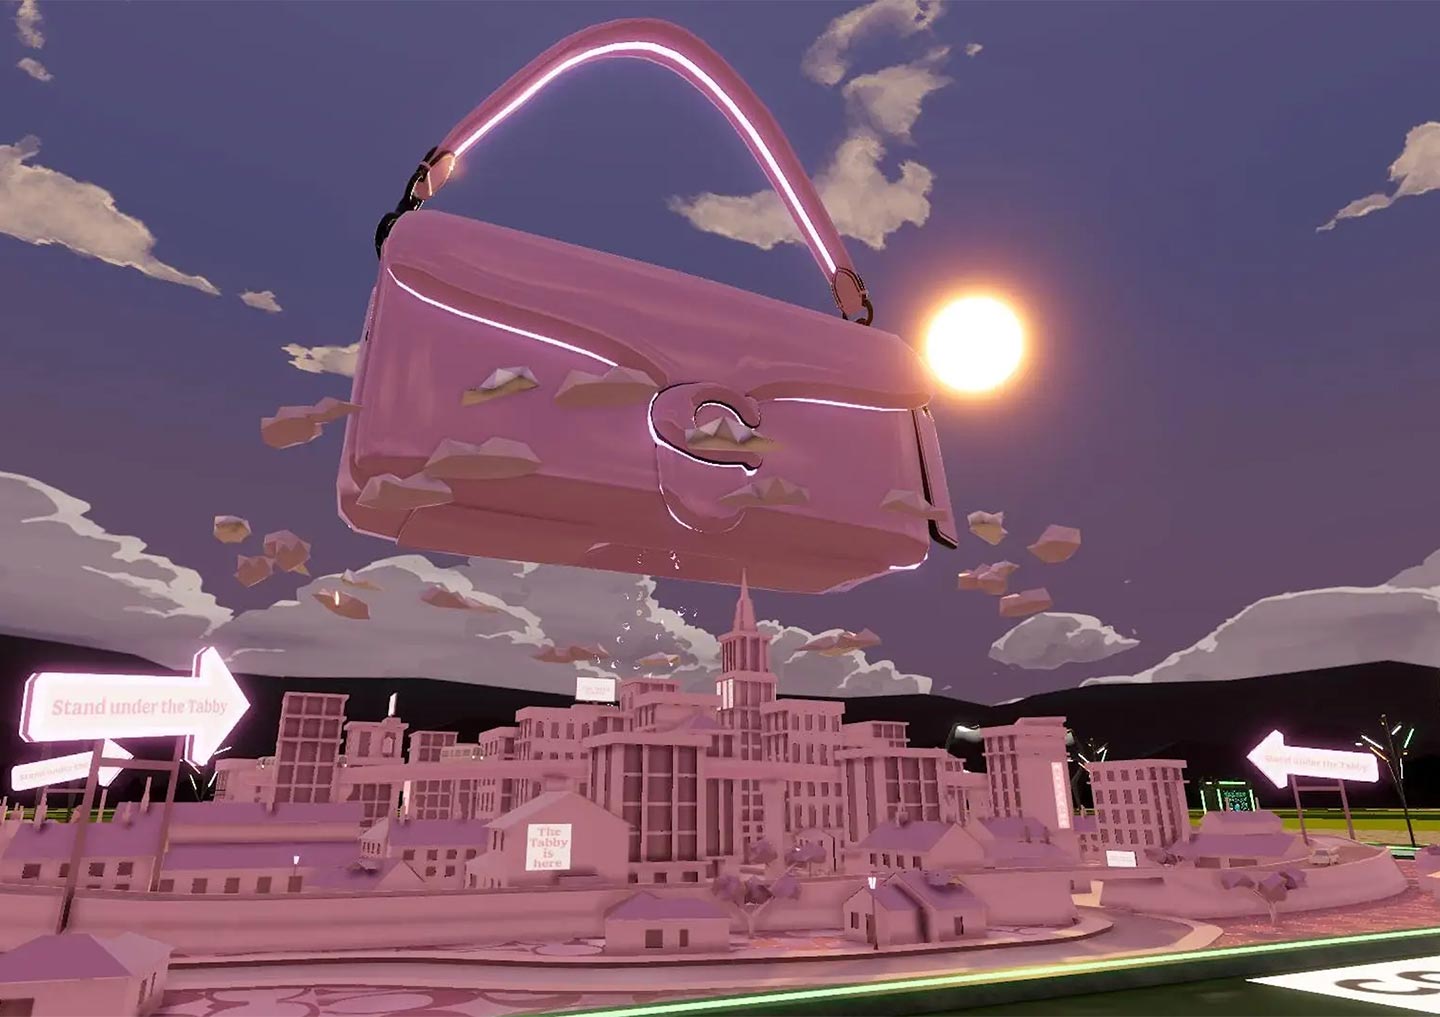 The Coach activation at Metaverse Fashion Week in Decentraland created by Threediem